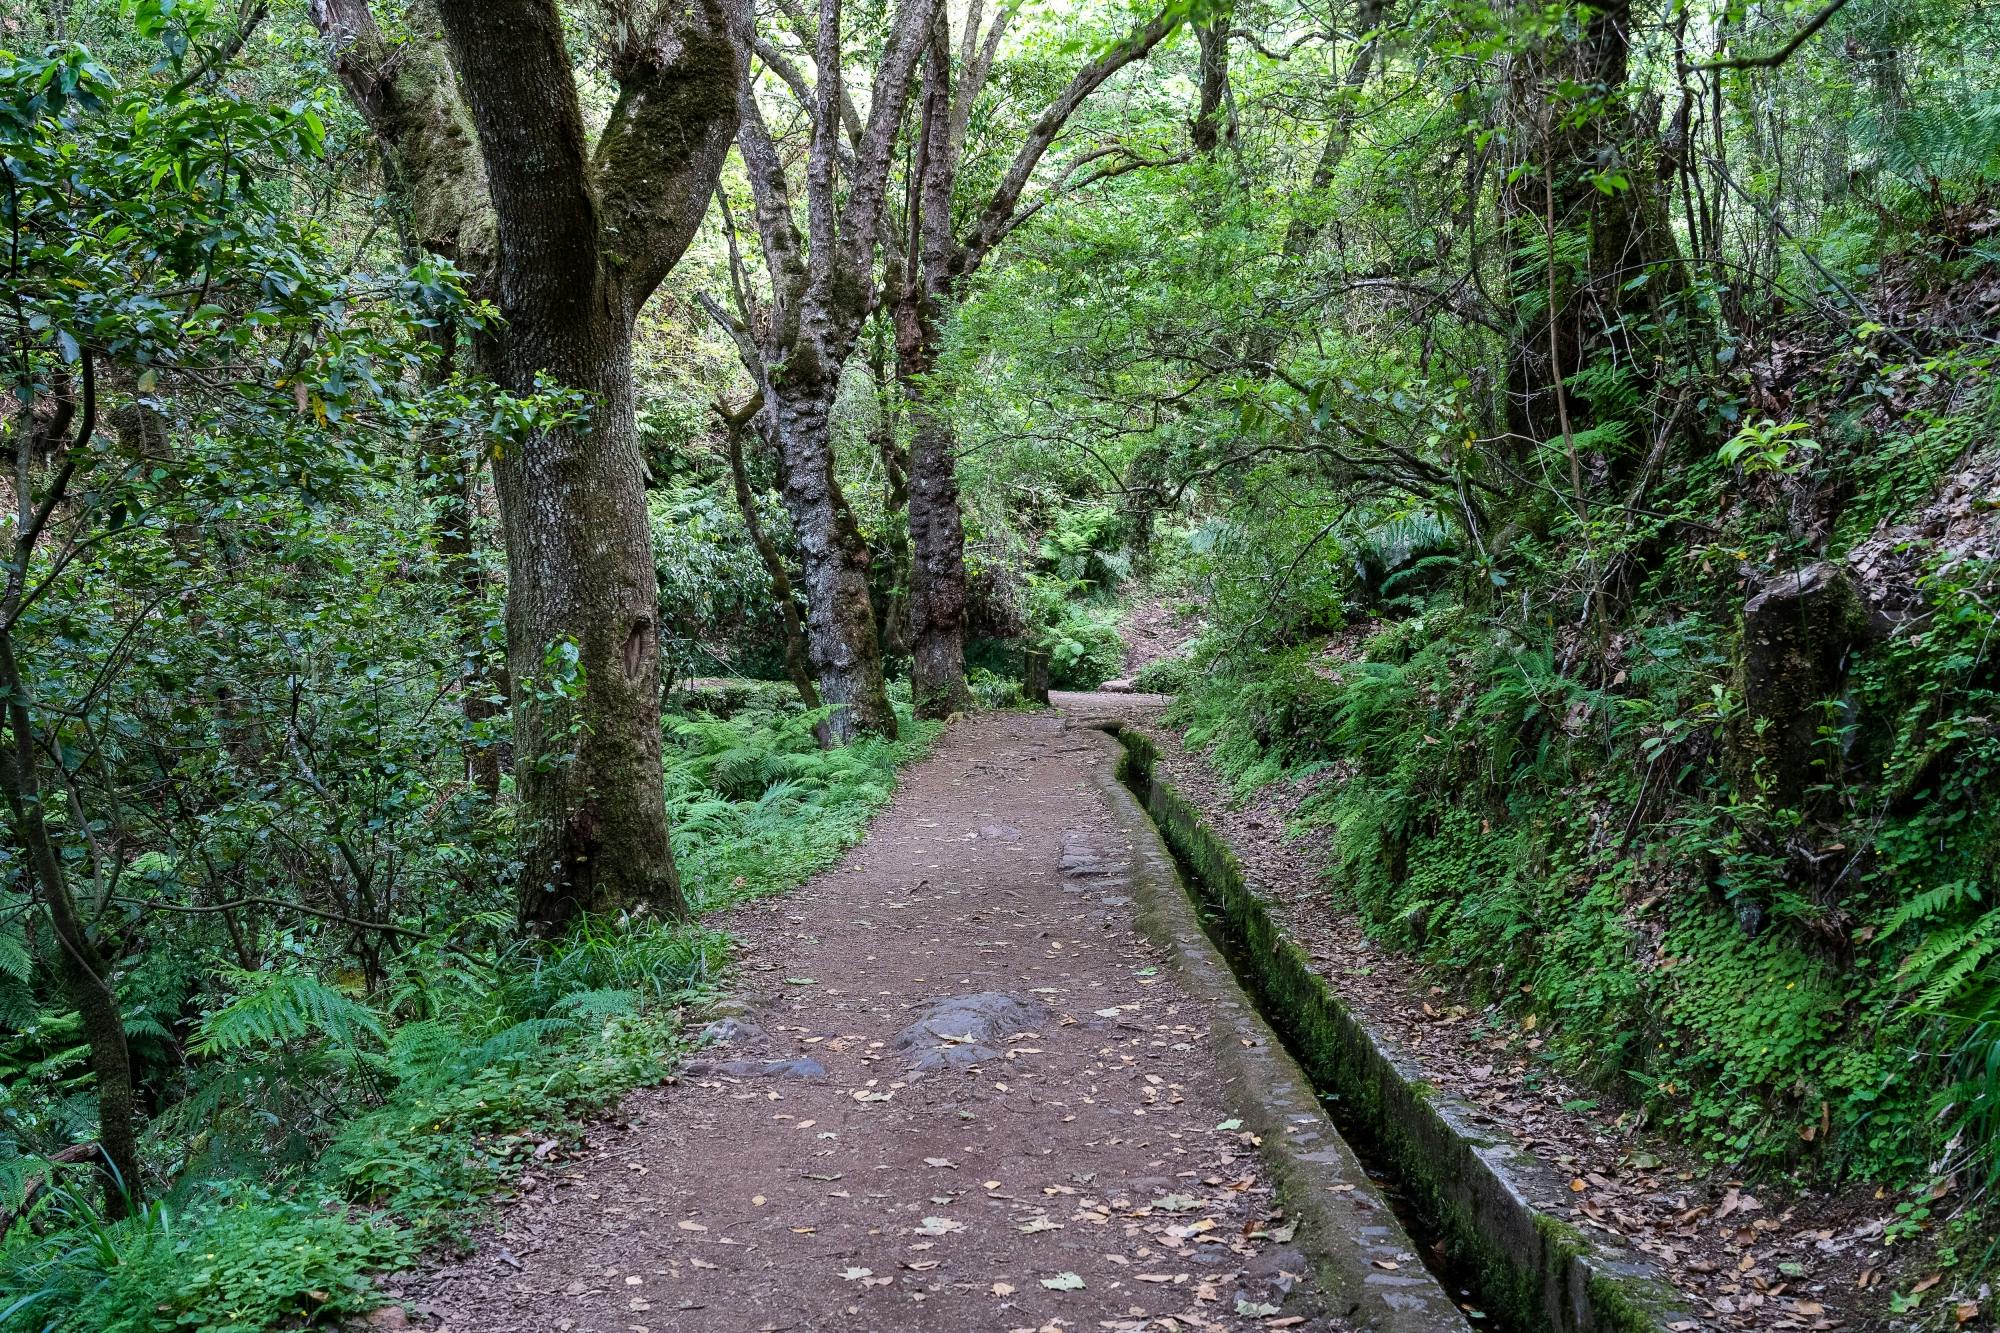 Deluxe Eastern Madeira Tour with Local Lunch and Levada Walk